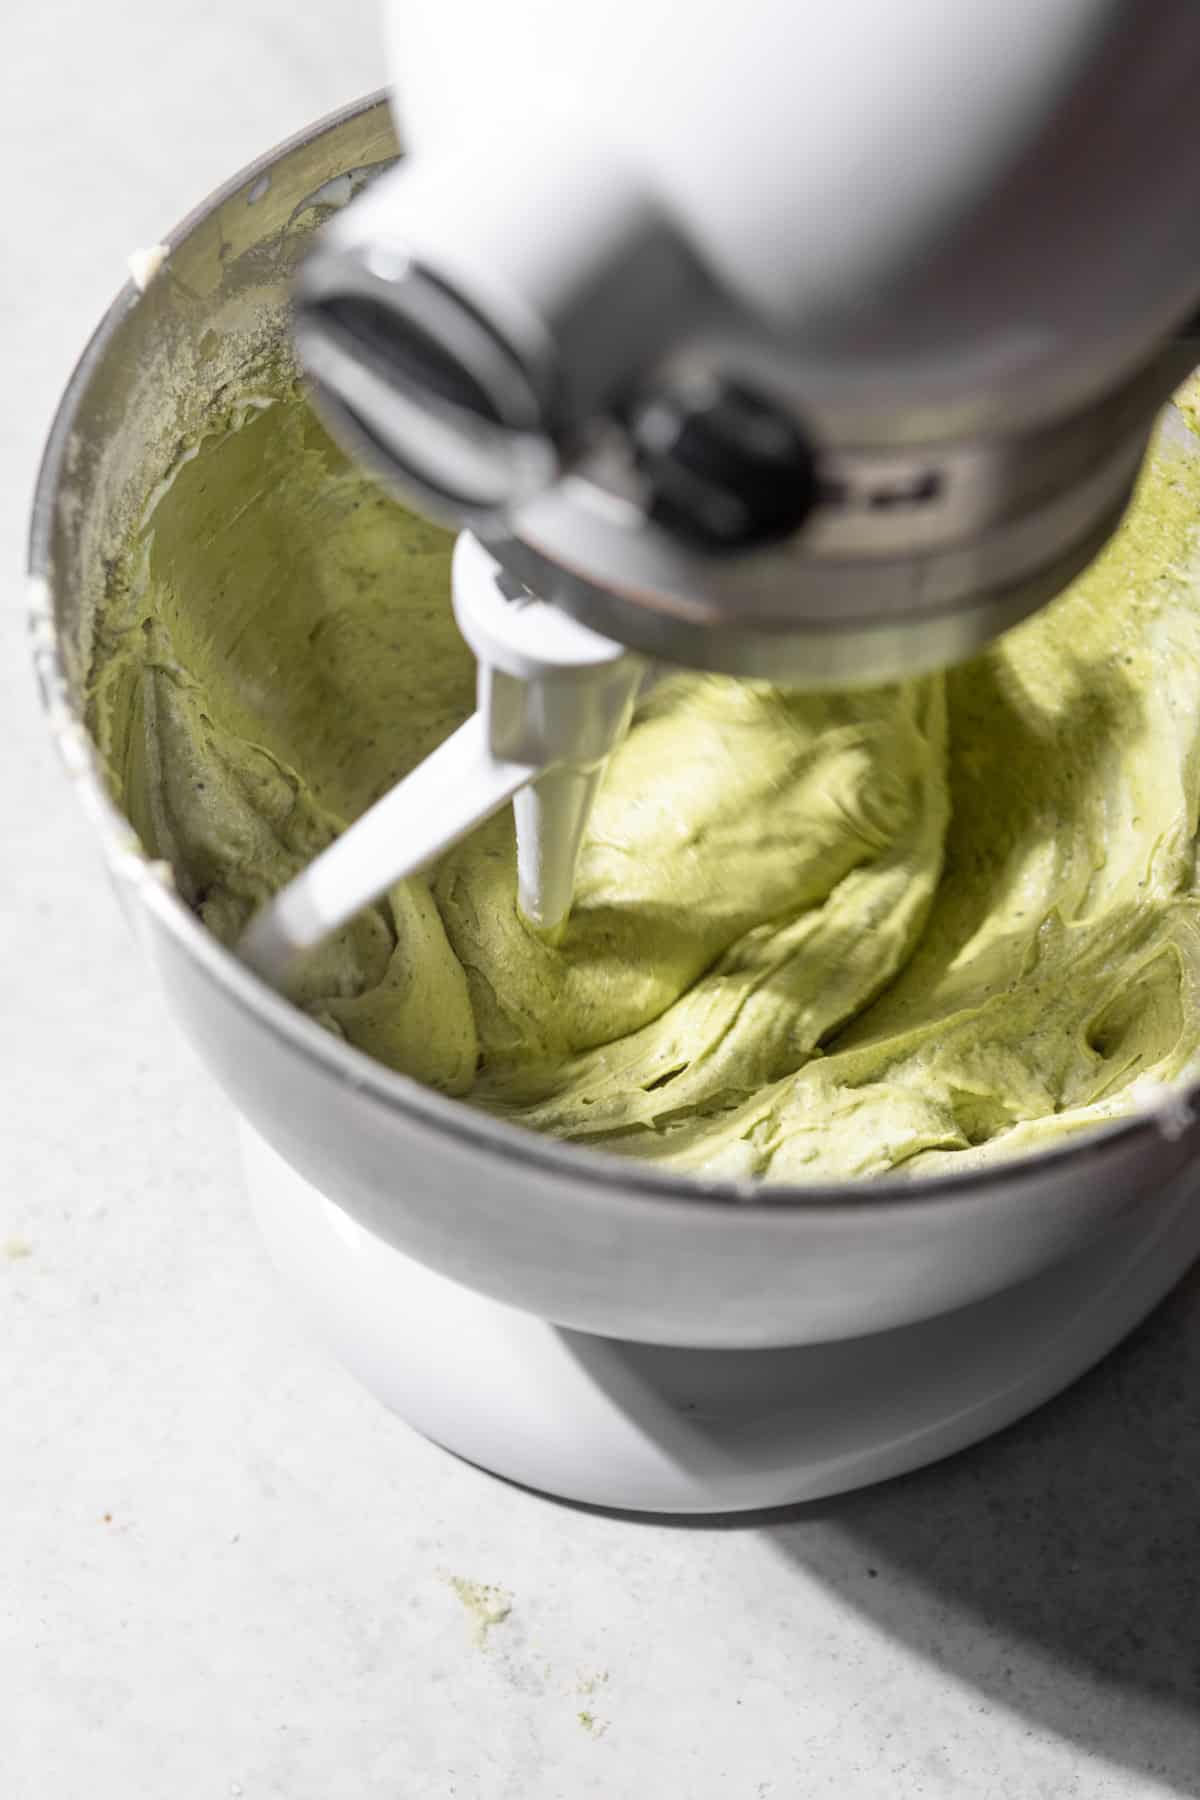 Green cake batter in the bowl of a stand mixer.